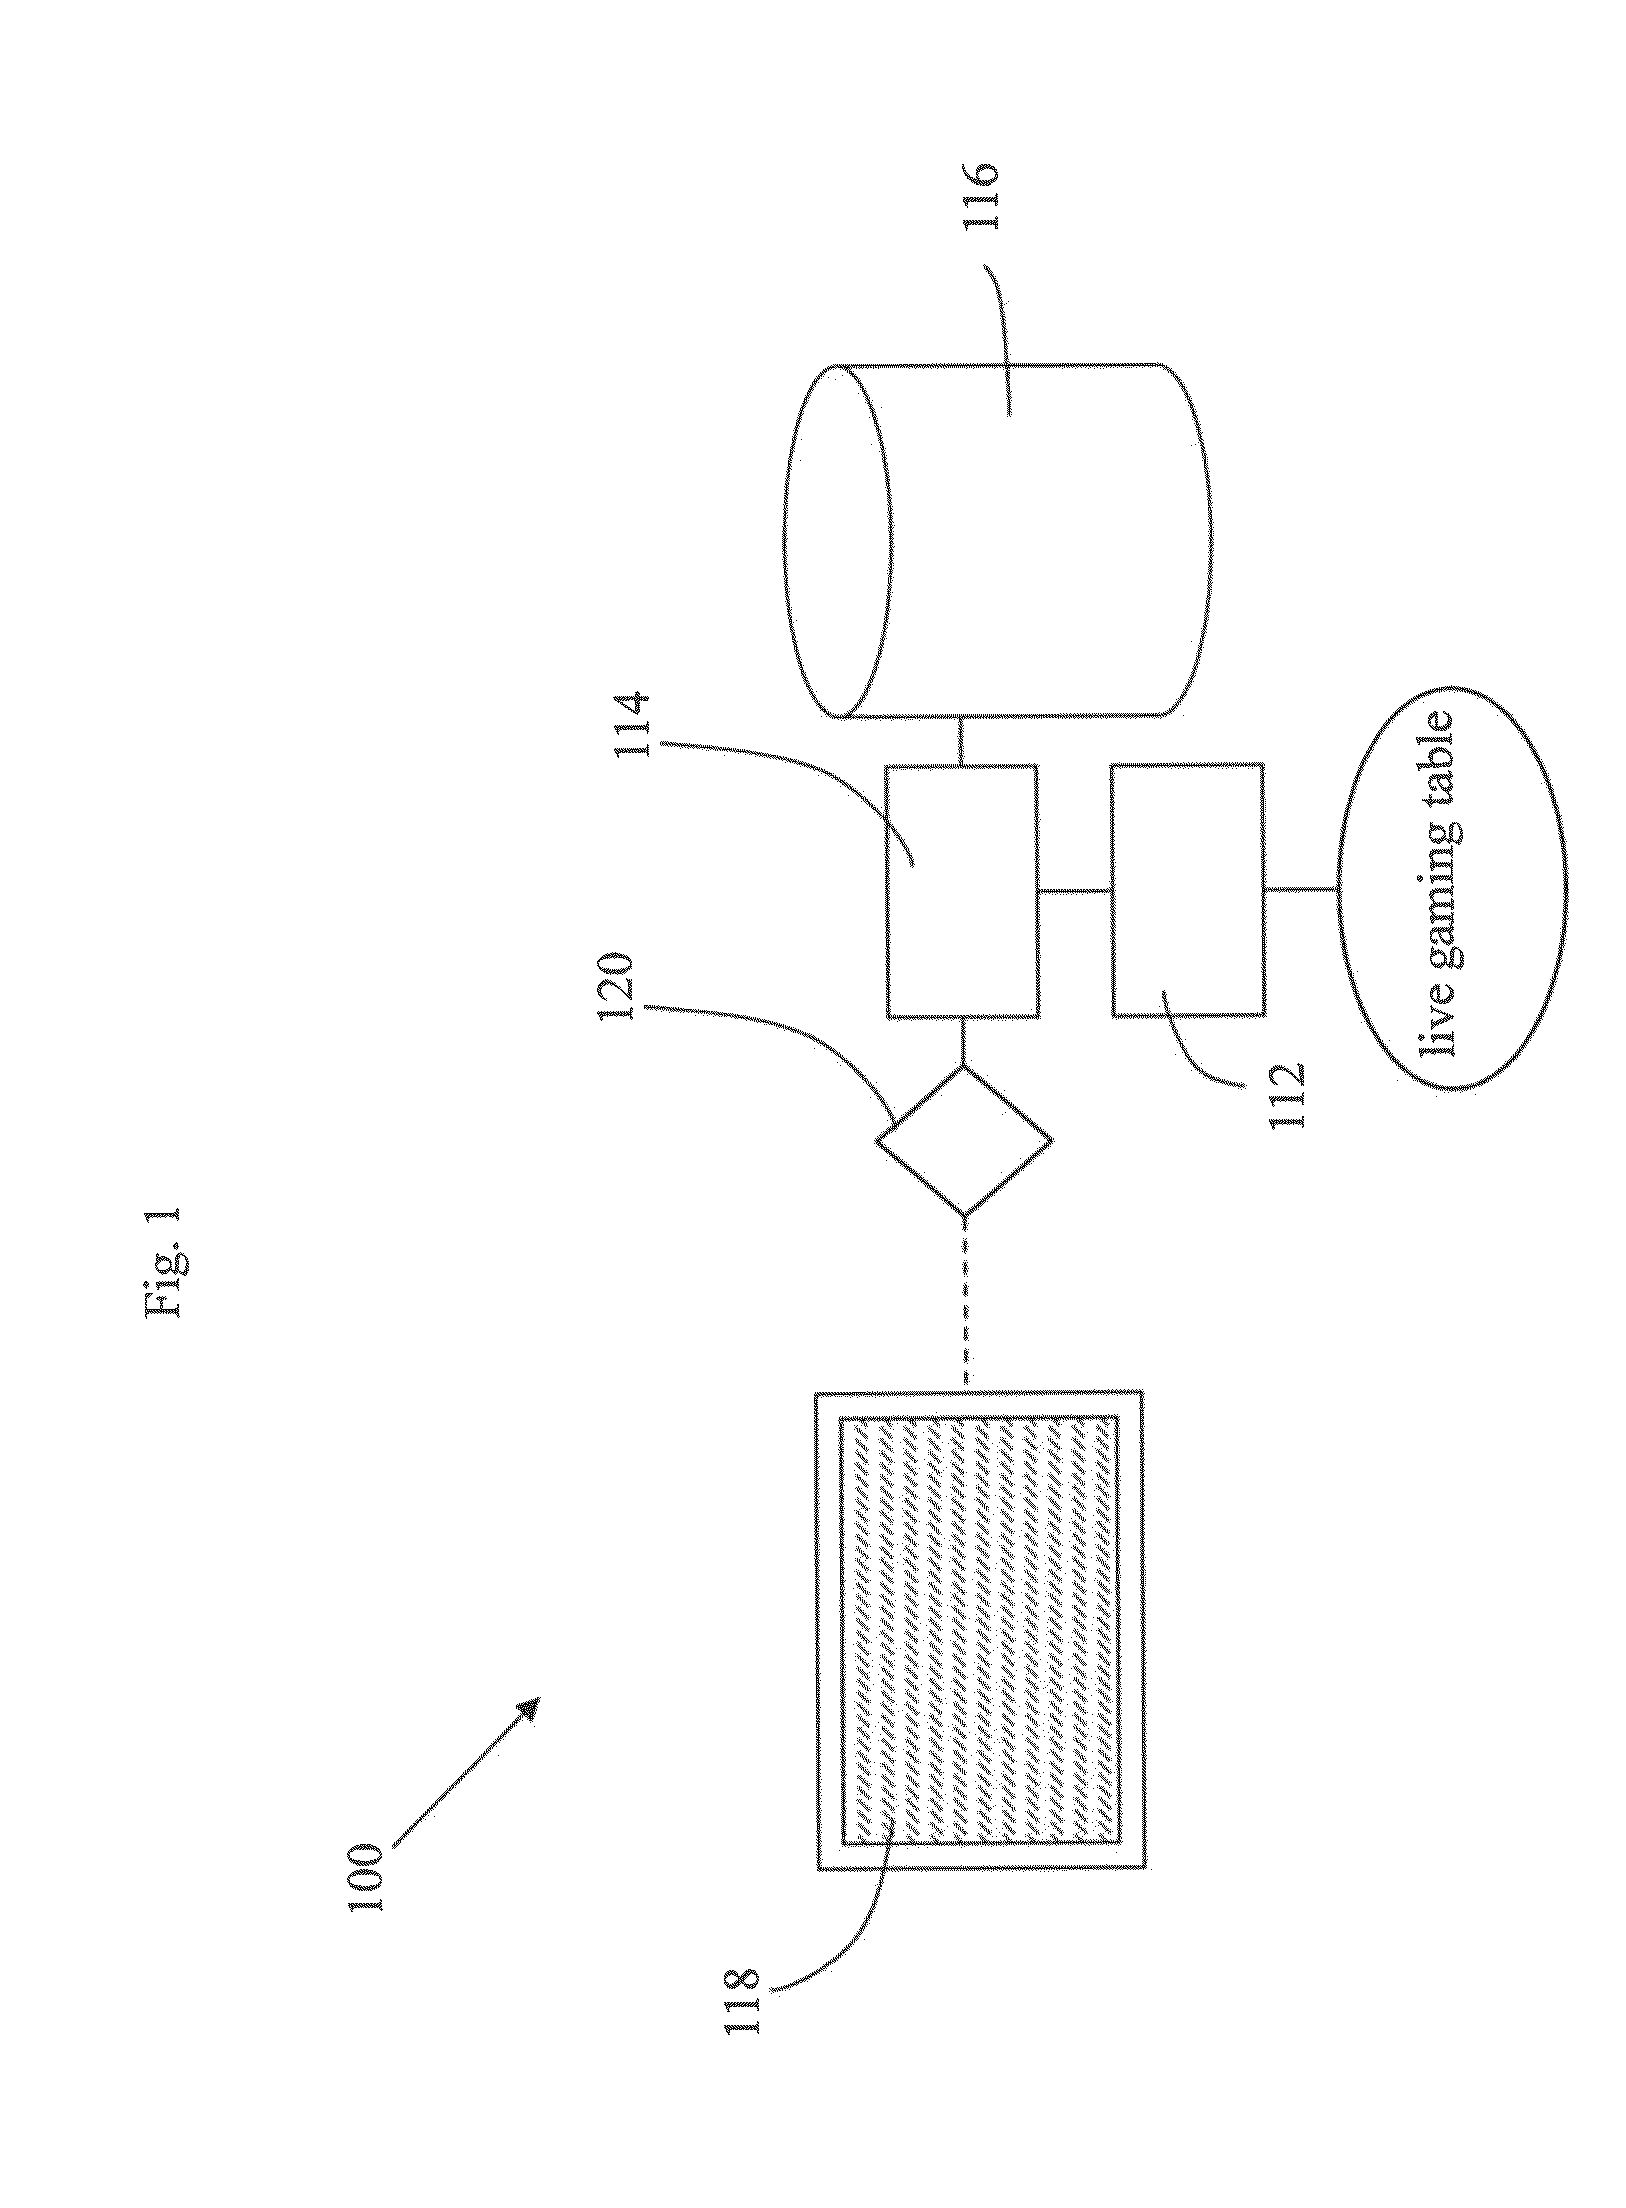 System and method for providing remote gaming featuring live gaming data